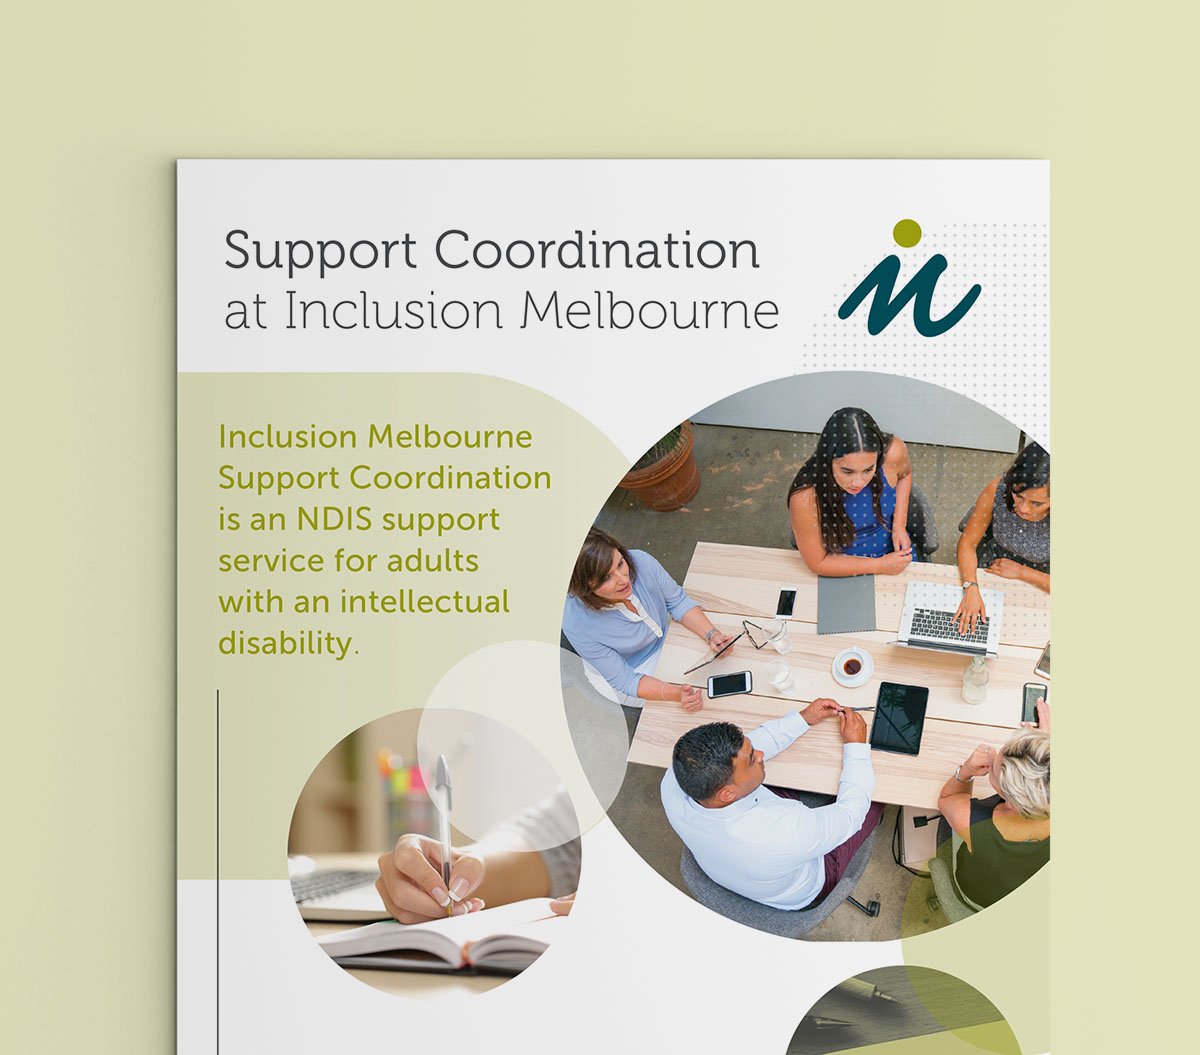 The front of the Support Coordination flyer design